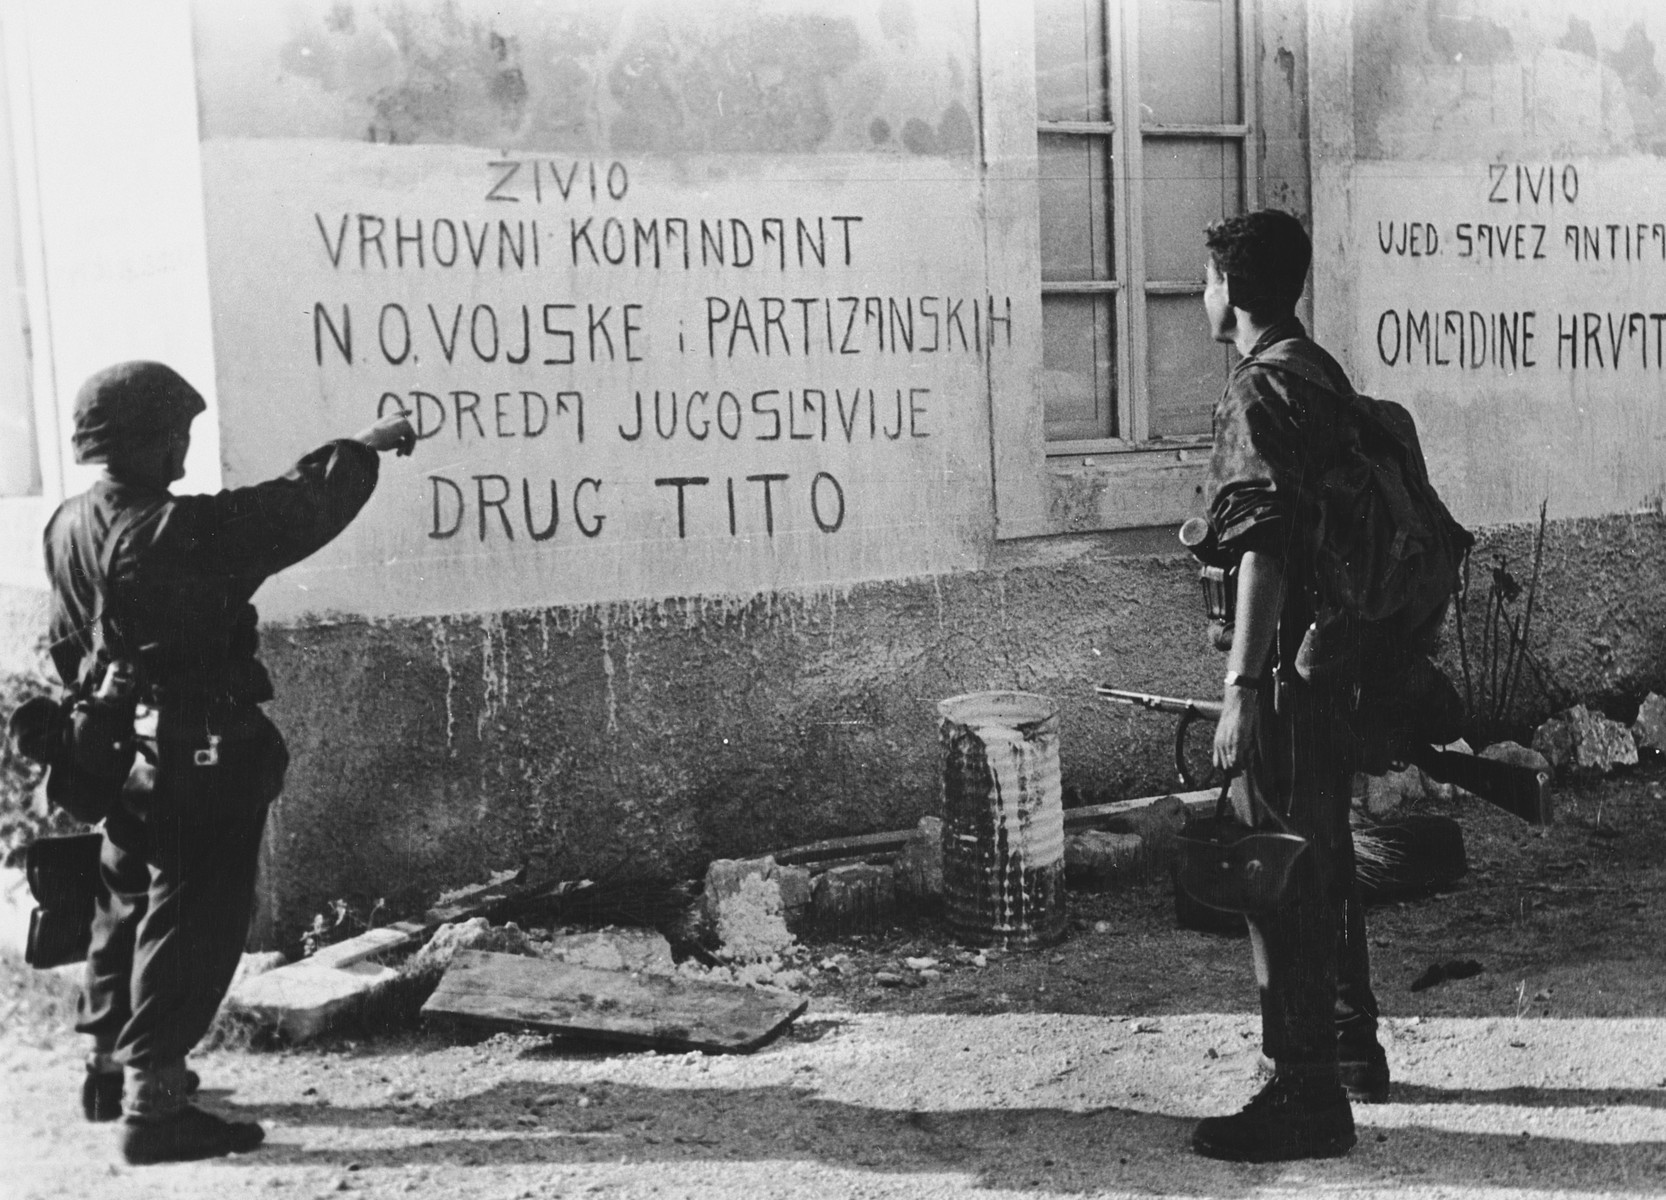 Soldiers of the Prinz Eugen Division point to writing on the front of a house with a graffiti on it ("Zivio Vrhovni Komandant N.O.Vojske; Partizanskih Odreda Jugoslavije Drug Tito"). 

The original Waffen-SS caption reads, "Einsatz an der Adria. Aufschriften auf einem vom Feind nun verlassenen Gemeindehaus."  (Tranlsated, "Action near the Adria. Capturing a community house, which was left by the enemy."

One of a series of photographs taken by the 7th SS Volunteer Mountain Division Prinz Eugen in Croatia, Serbia, and Montenegro from 1942 to 1944, after the German invasion of the Kingdom of Yugoslavia. The photographs are believed to have been captioned by the commanding office of the Waffen-SS, and had been in the possession of  Friedrich Wilhem Krueger, who served with the division from November 1943 until April 1944.